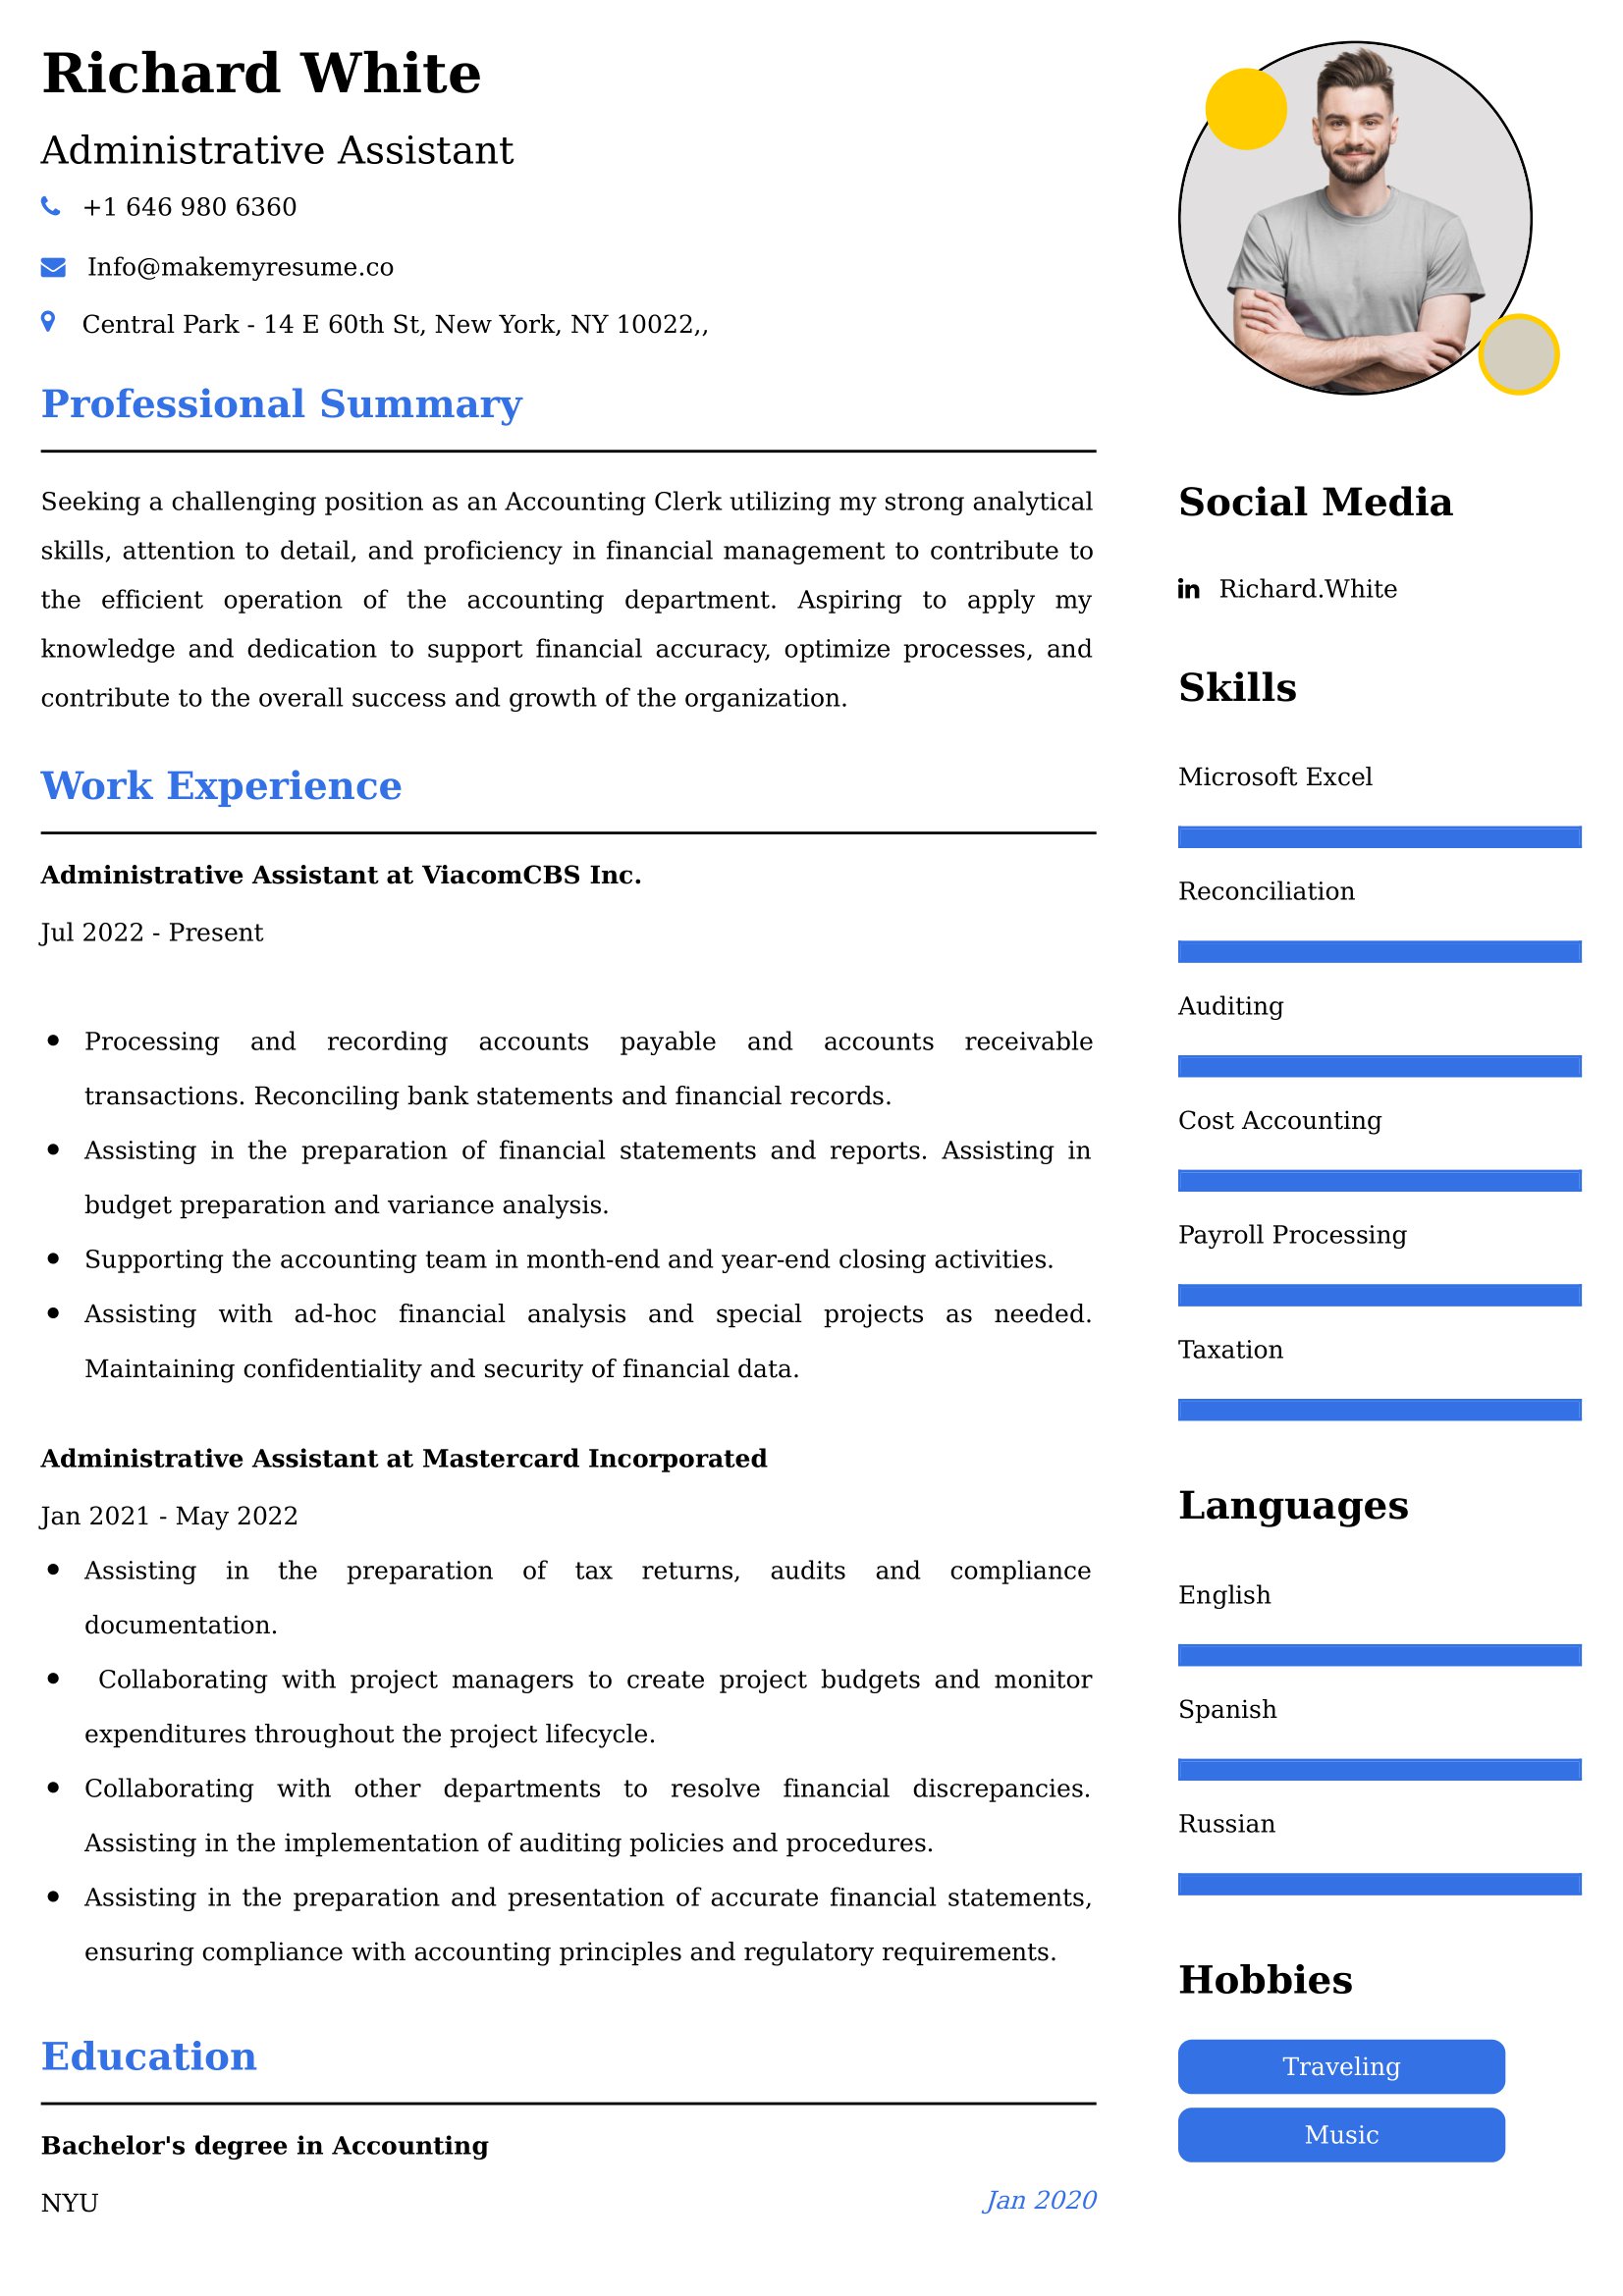 Administrative Assistant Resume Examples India